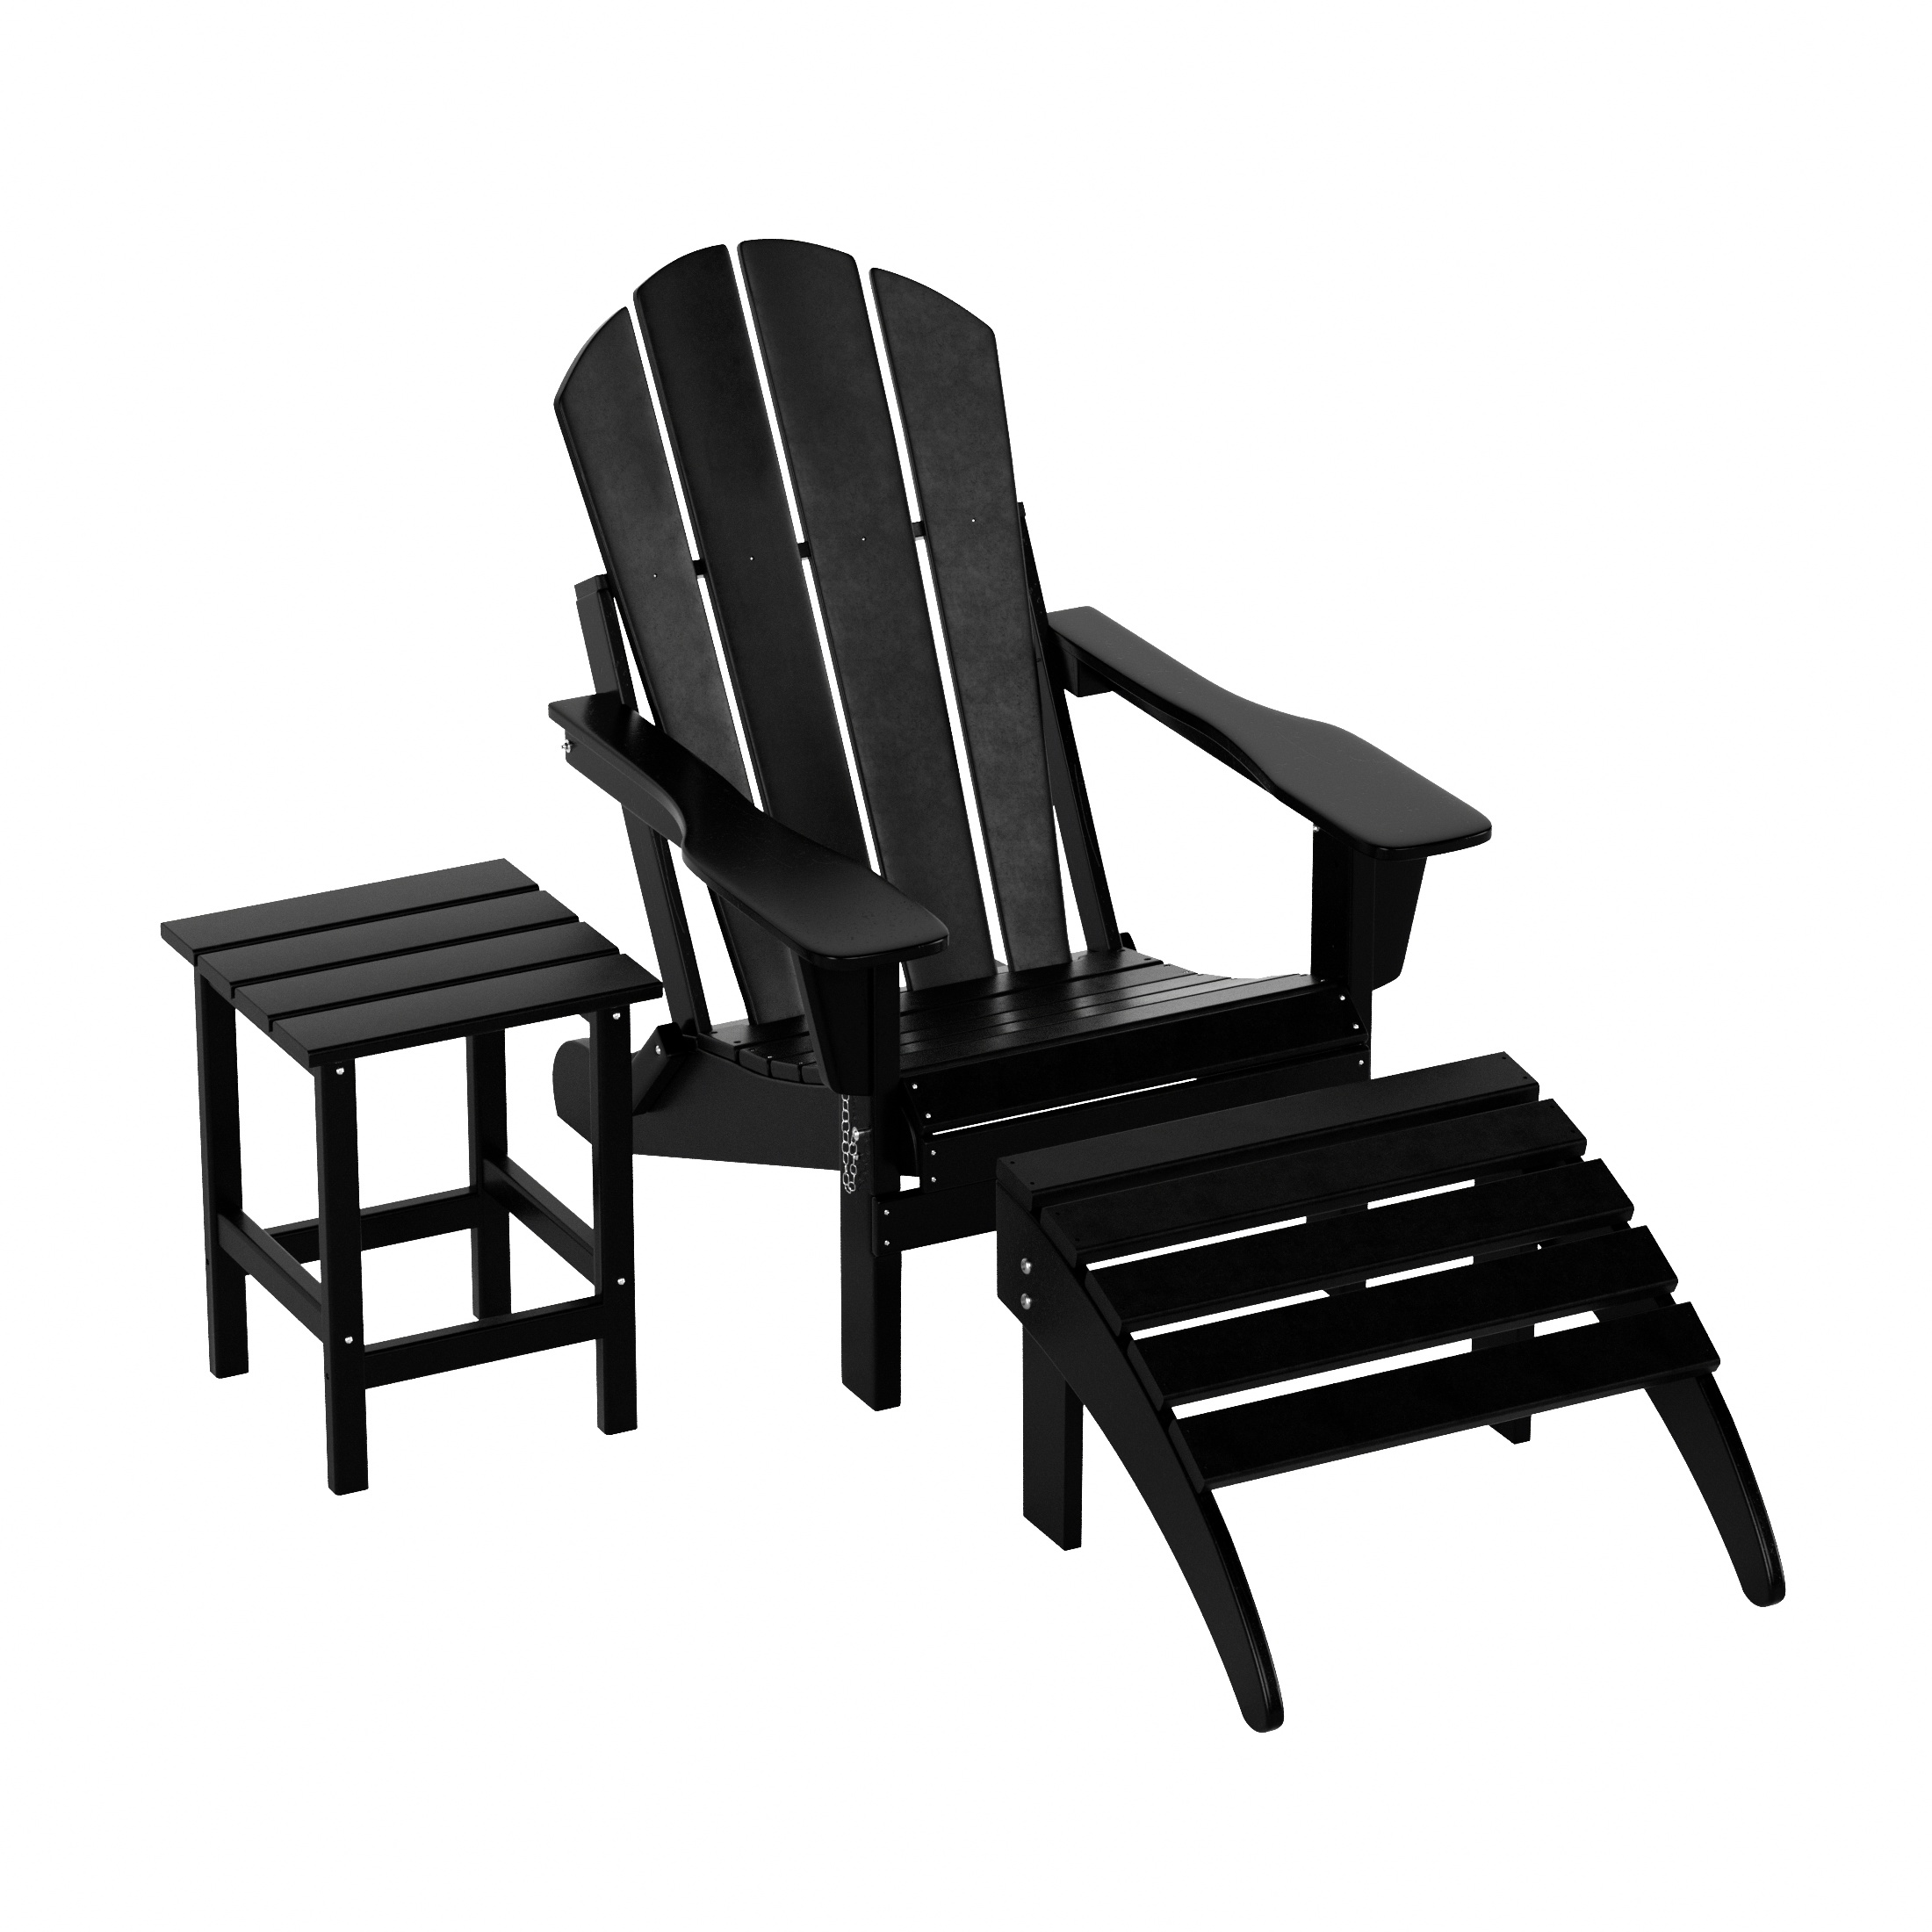 WestinTrends Malibu Outdoor Lounge Chairs, 3-Pieces Adirondack Chair Set with Ottoman and Side Table, All Weather Poly Lumber Patio Lawn Folding Chair for Outside Pool Garden Backyard, Black - image 1 of 7